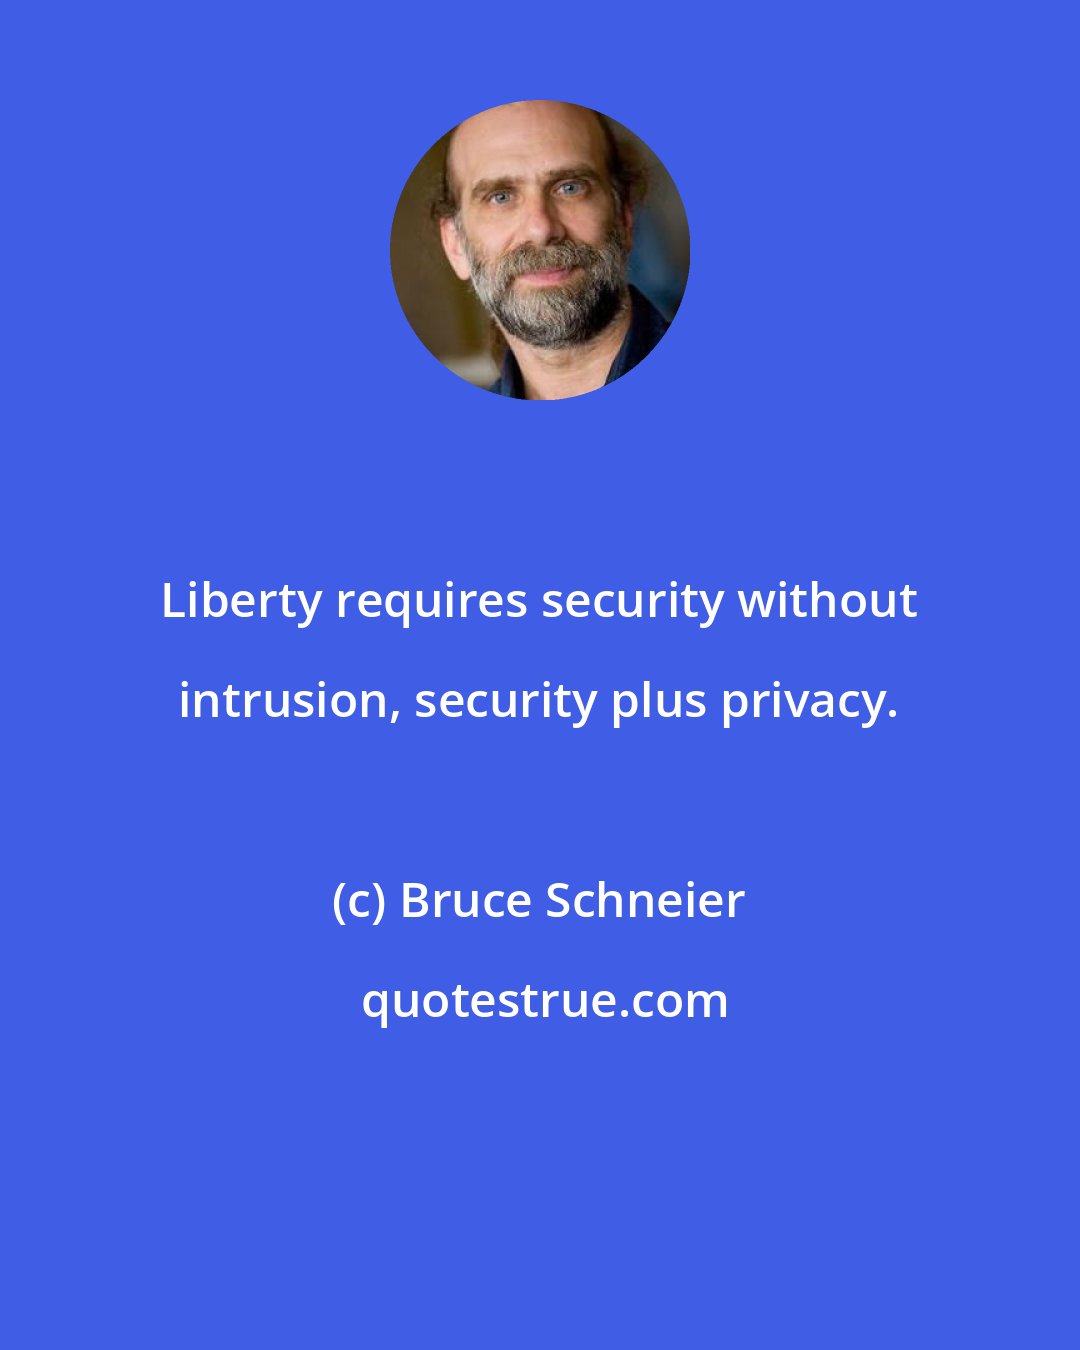 Bruce Schneier: Liberty requires security without intrusion, security plus privacy.